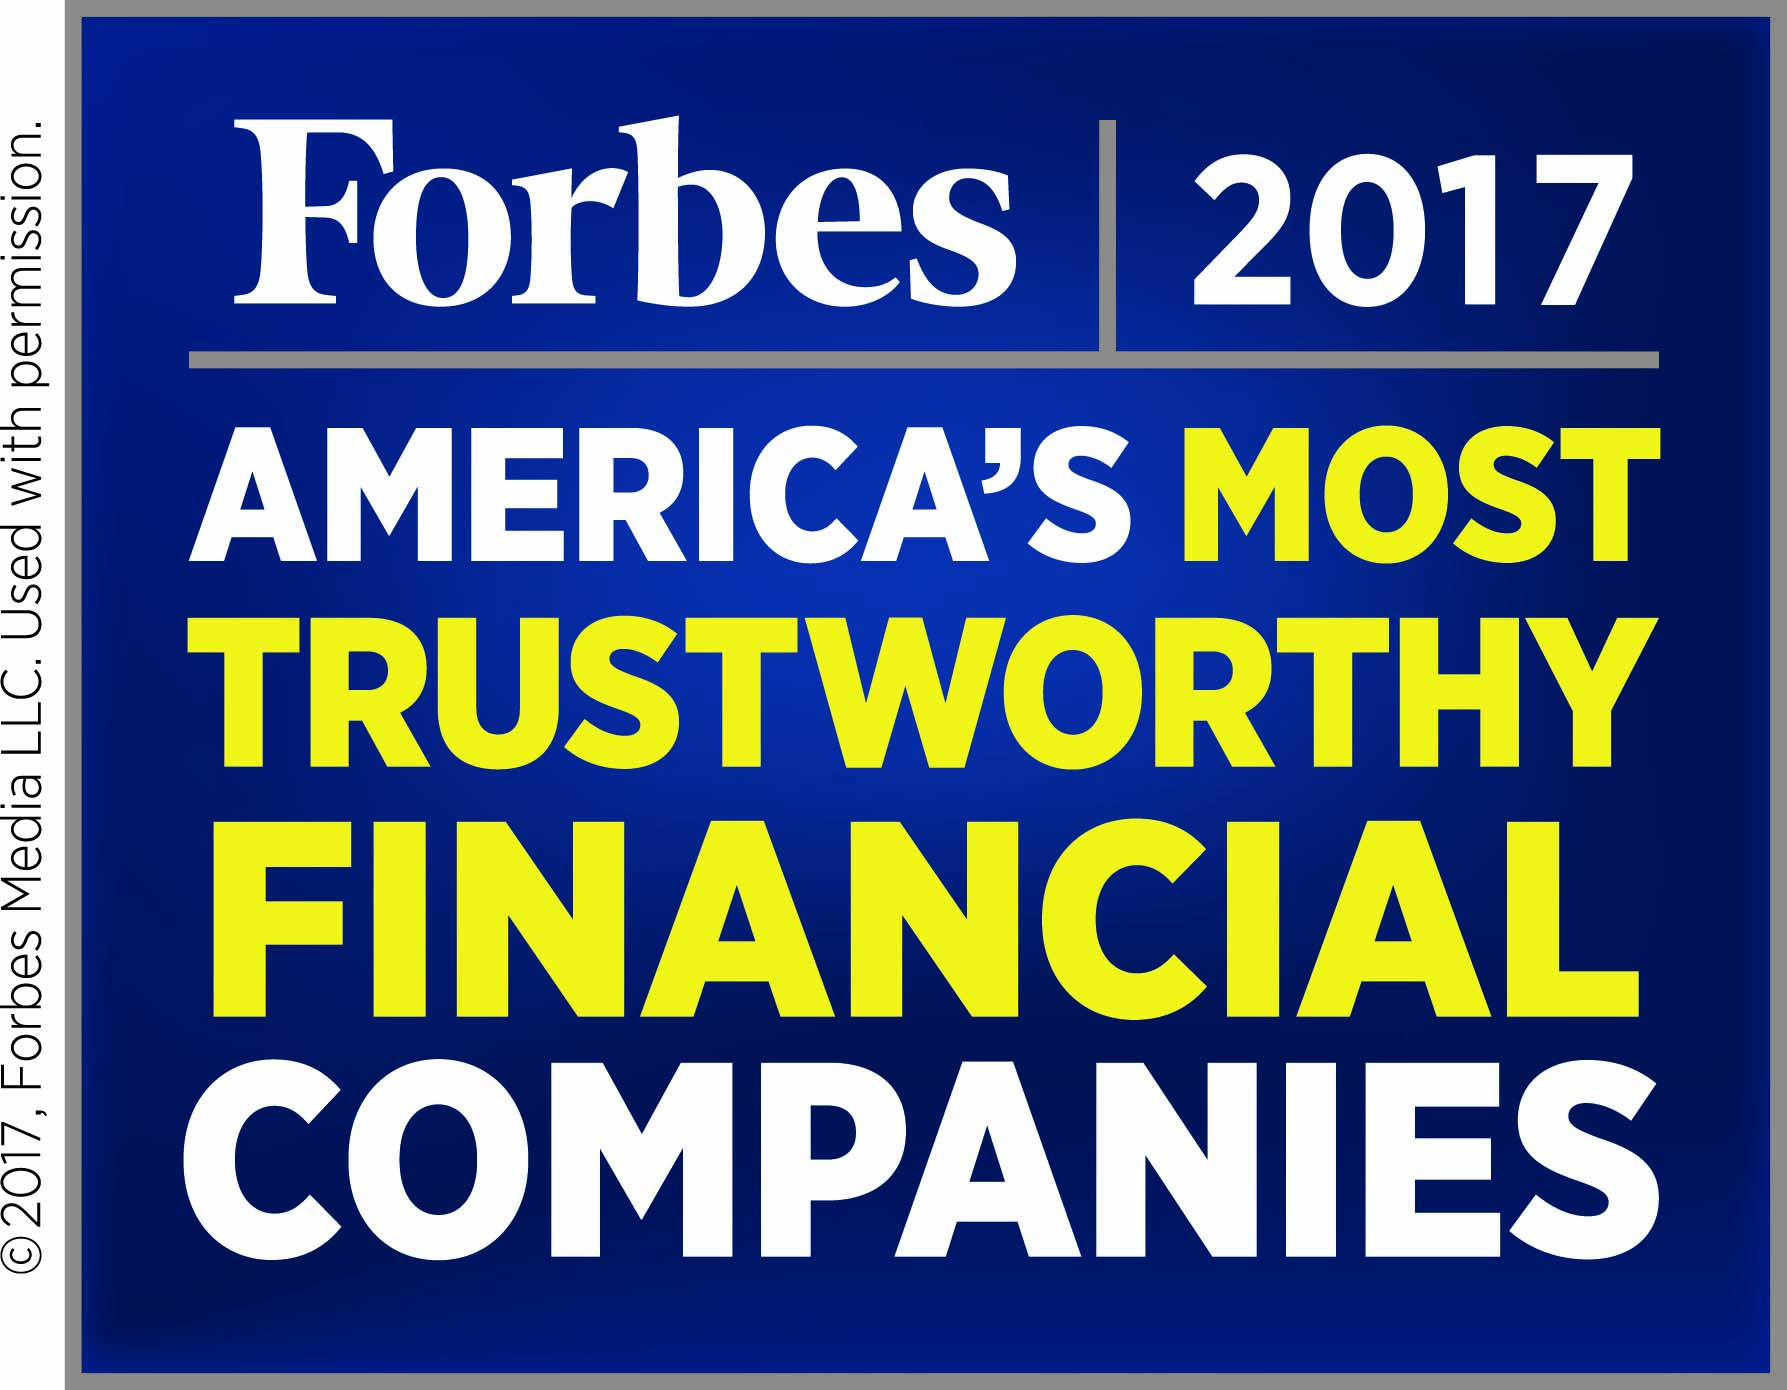 UFG Named to Forbes’ ® 2017 List of “America’s 50 Most Trustworthy